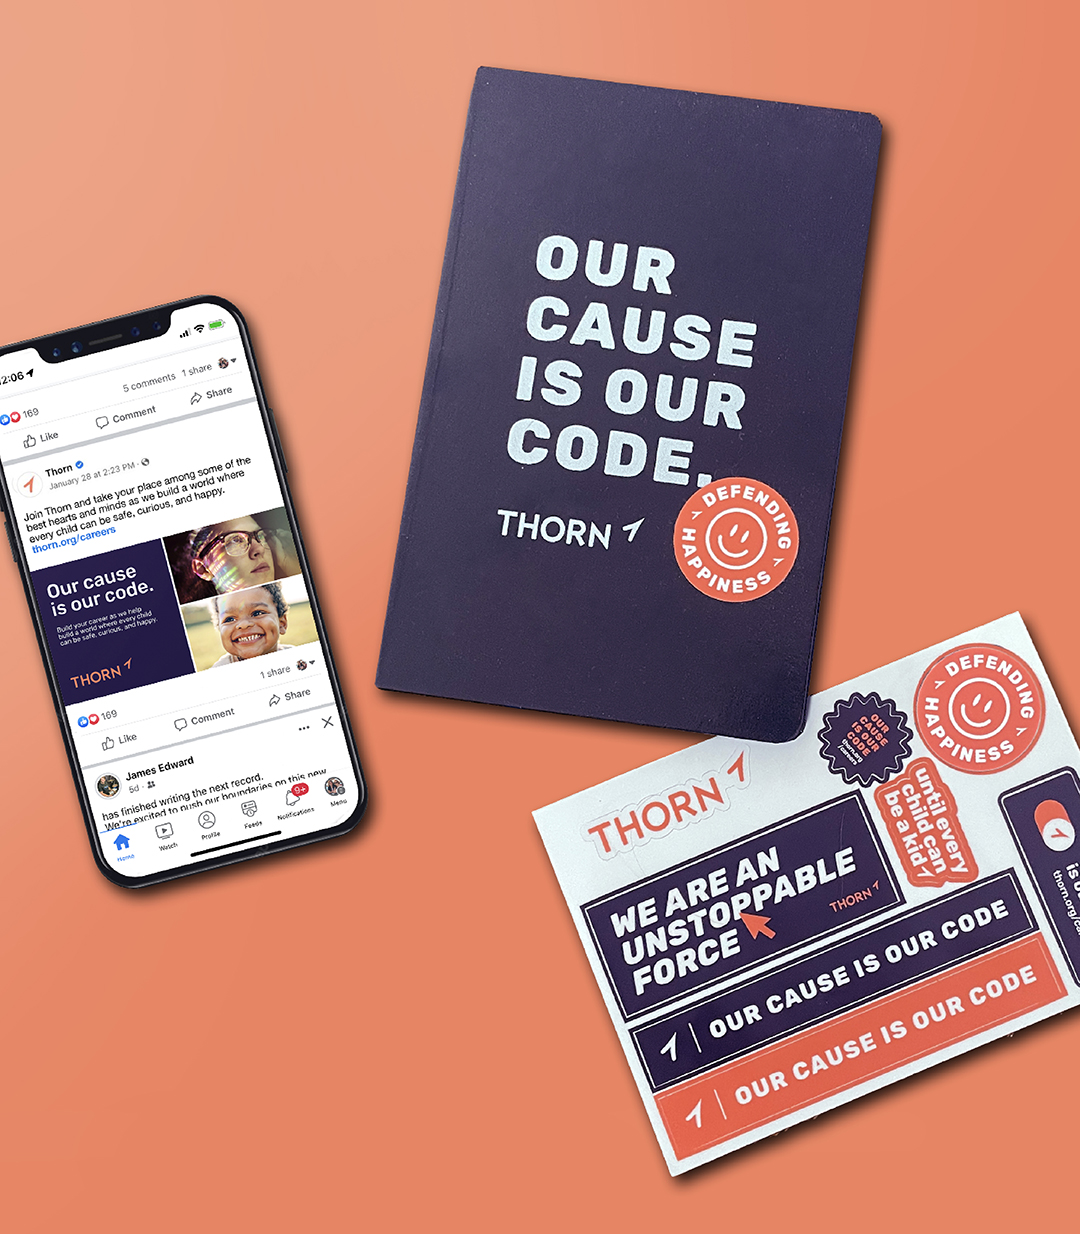 A collection of Thorn items, including a smartphone showing Thorn social media posts, a pamphlet with “Our Cause Is Our Code.” on the front cover, and a sticker sheet.